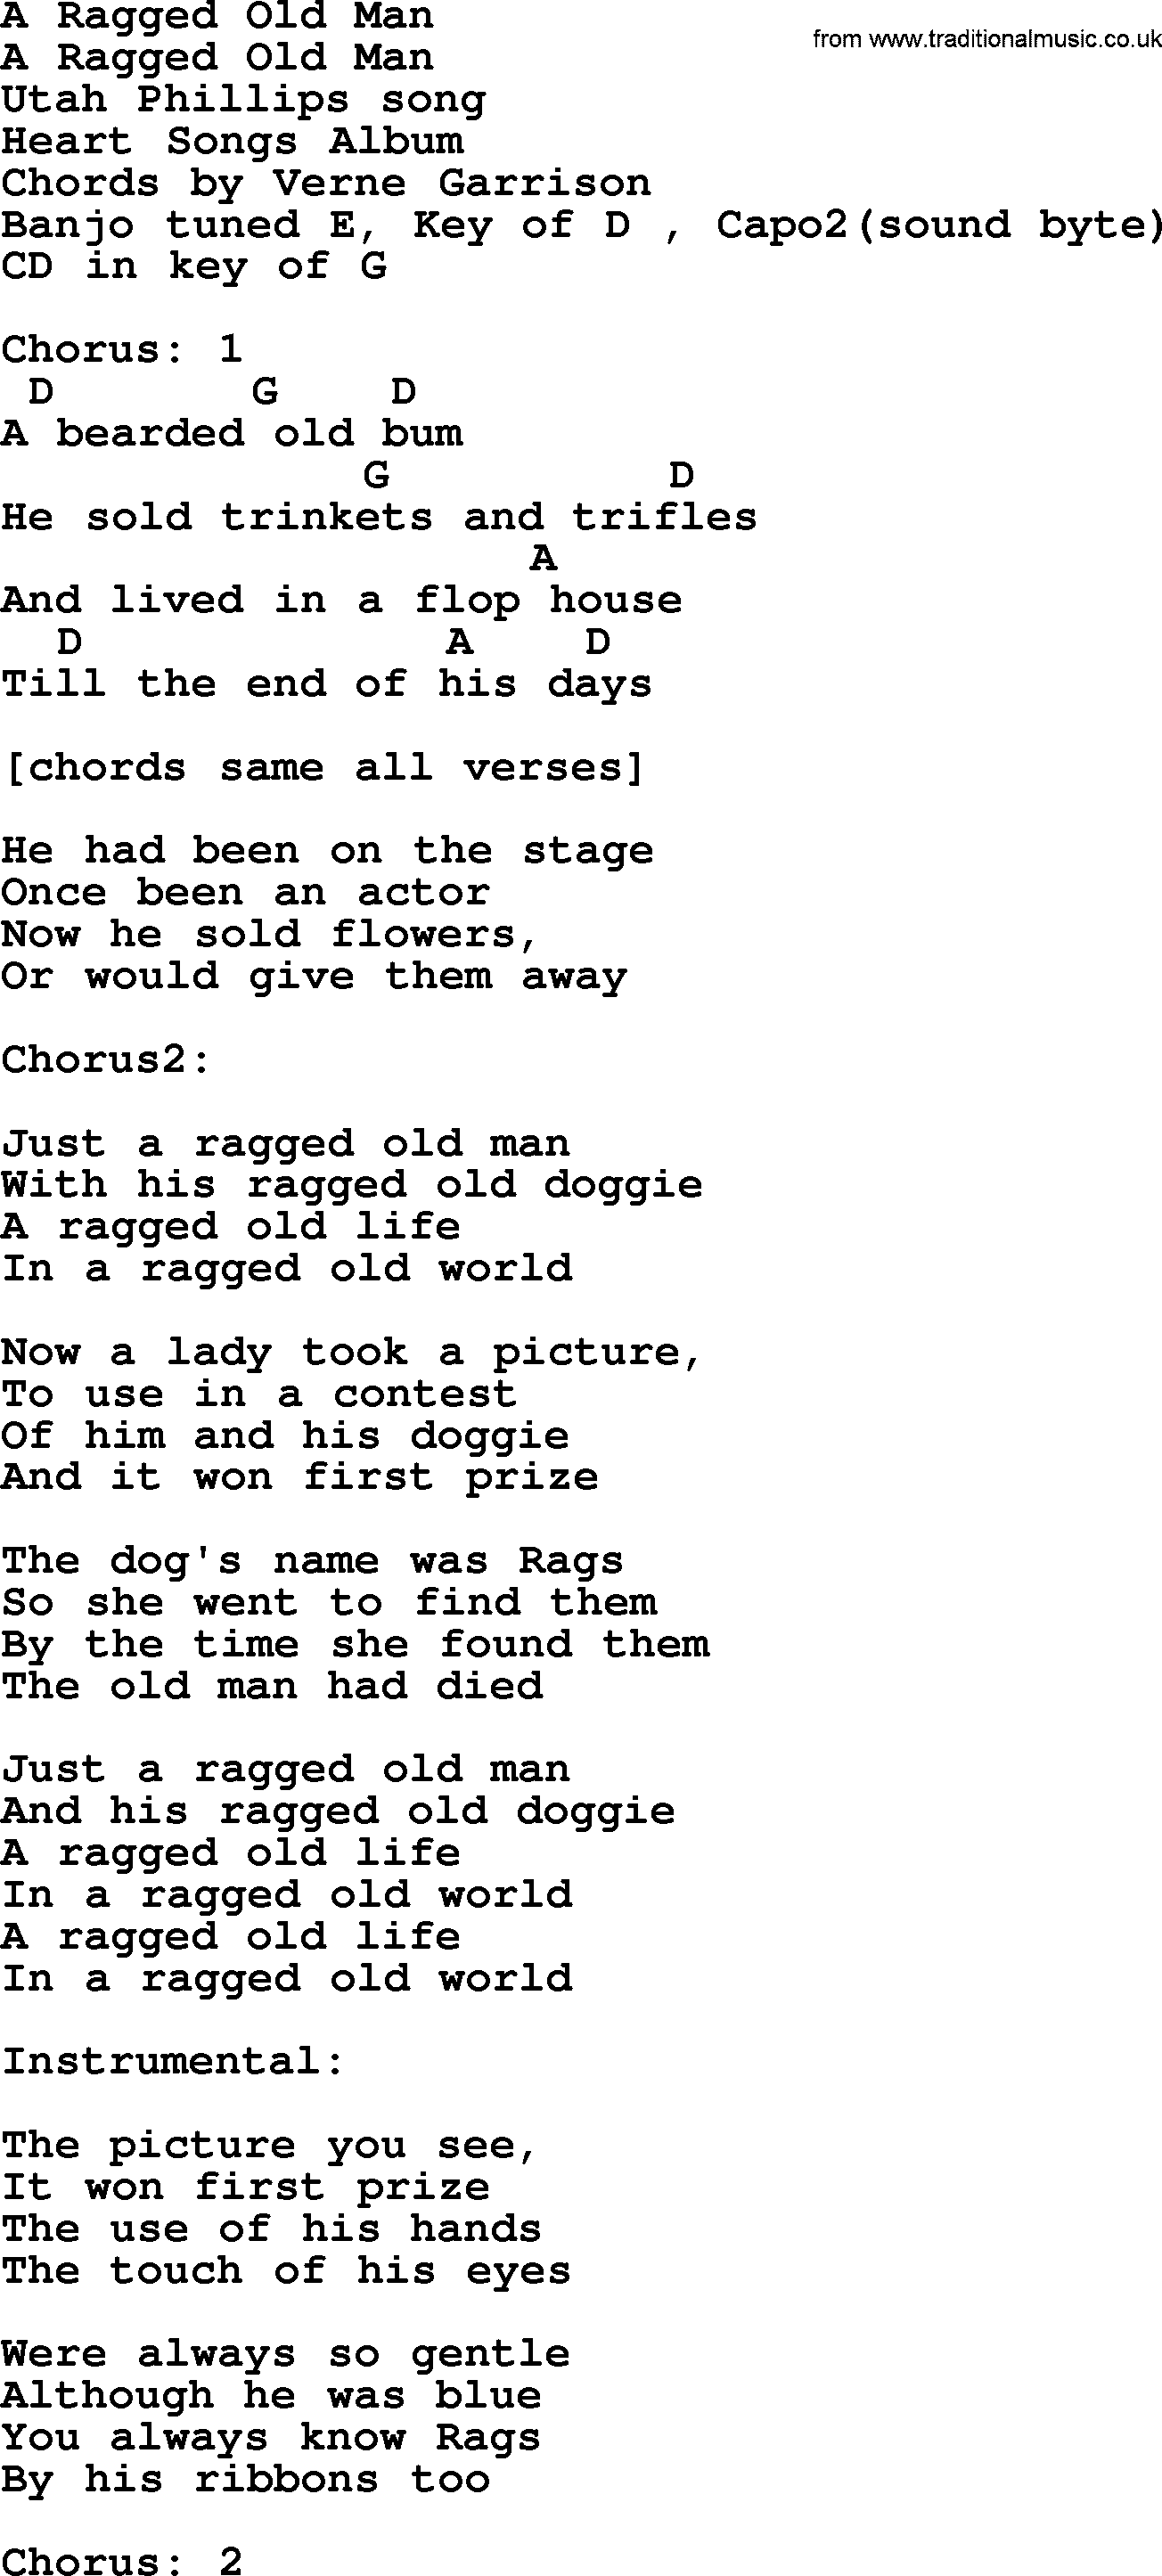 Bluegrass song: A Ragged Old Man, lyrics and chords